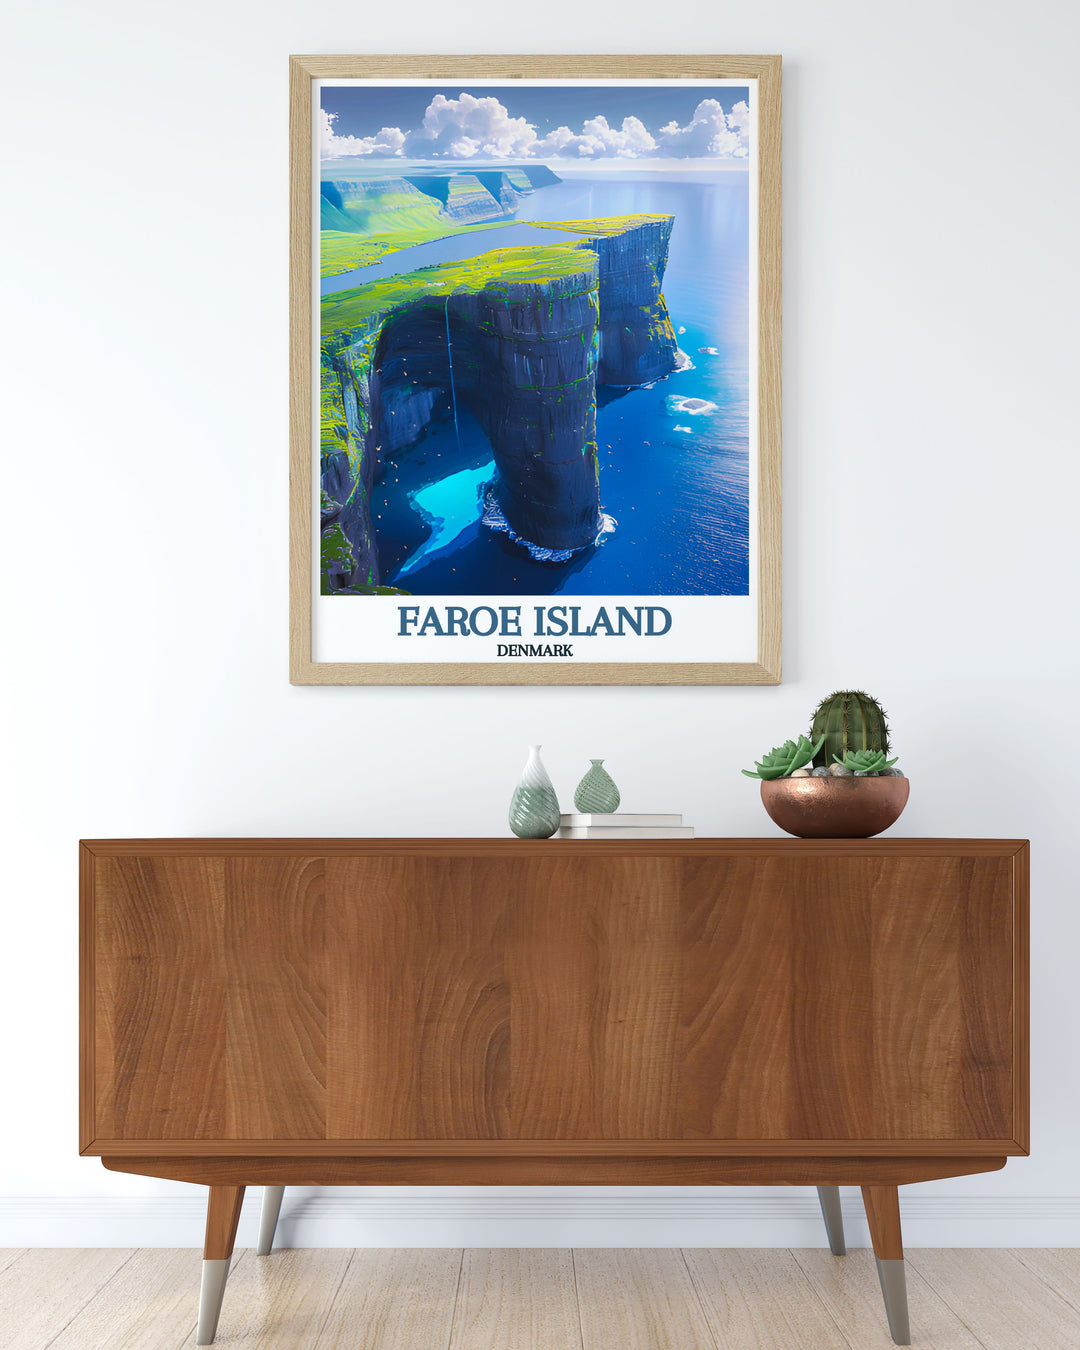 The serene beauty and surreal optical illusion of Sørvágsvatn are captured in this art print, perfect for adding a touch of the Faroe Islands charm to your home.